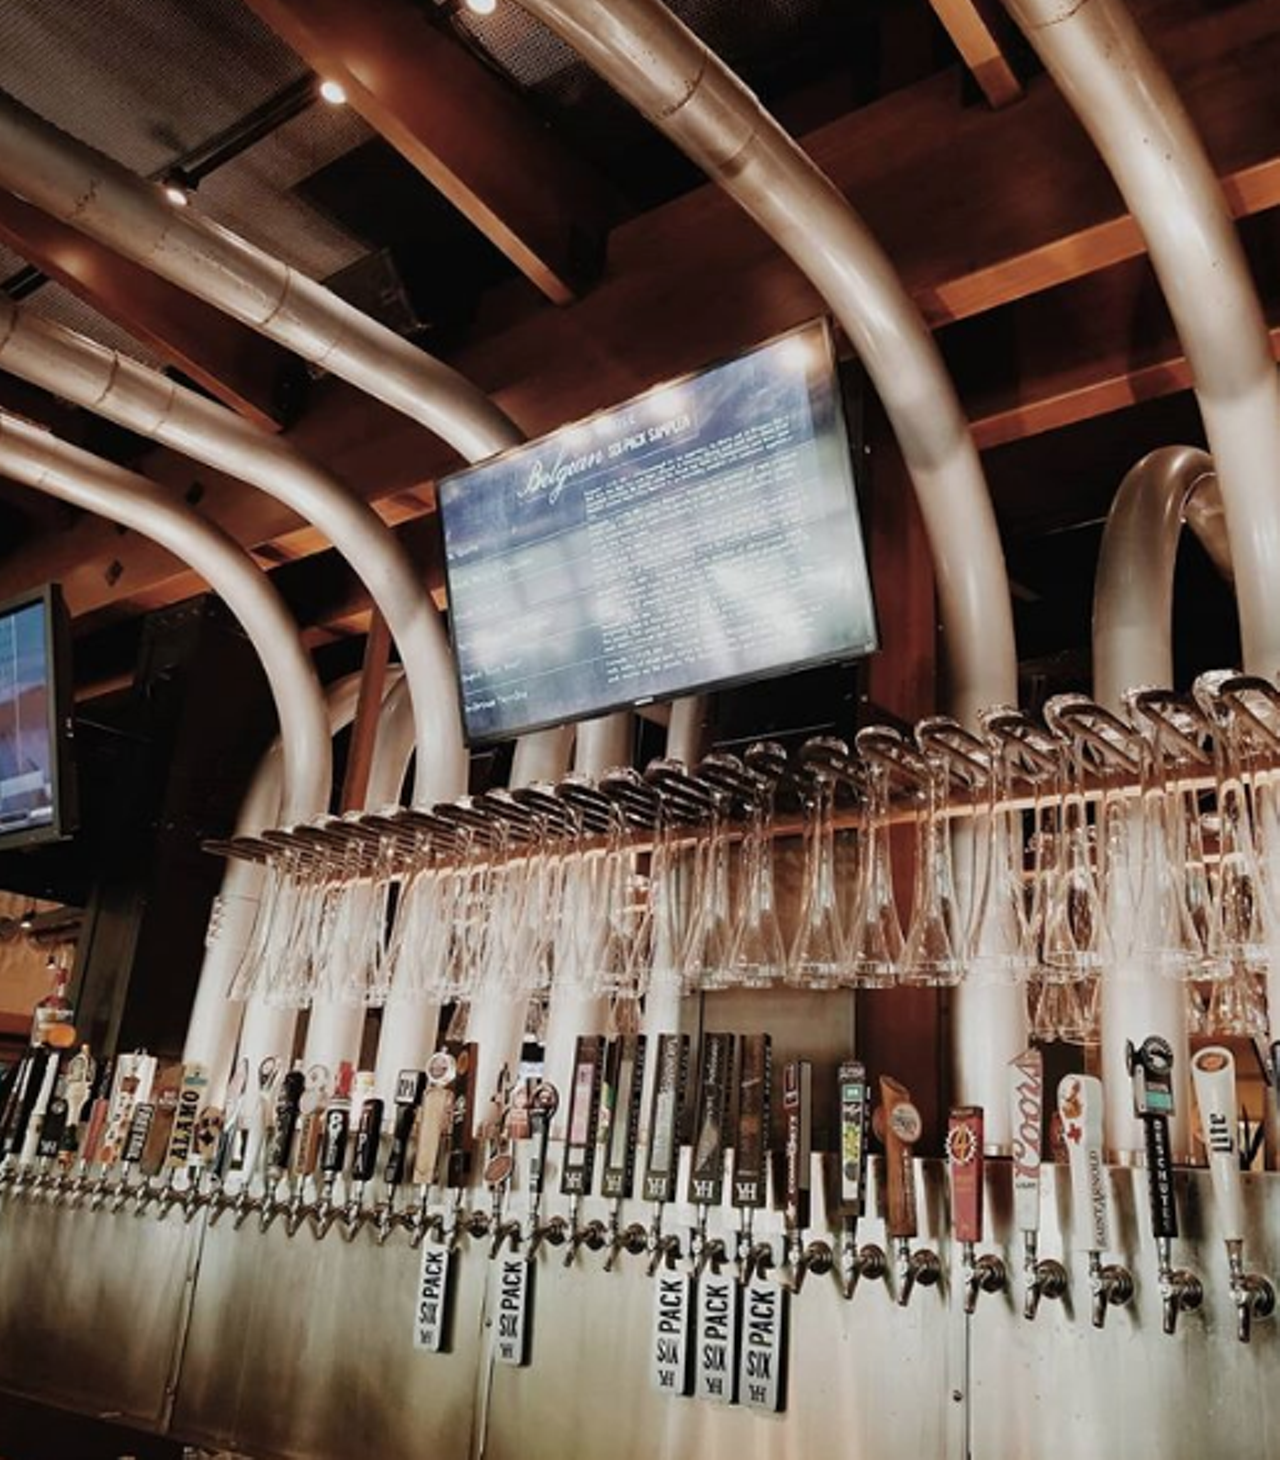 Yard House
Multiple locations, yardhouse.com
This is the place for flavor. There’s plenty of sauce choices – between Korean, Jamaican Jerk and whiskey black pepper — you can’t go wrong.
Photo via Instagram / grapes_of_roth